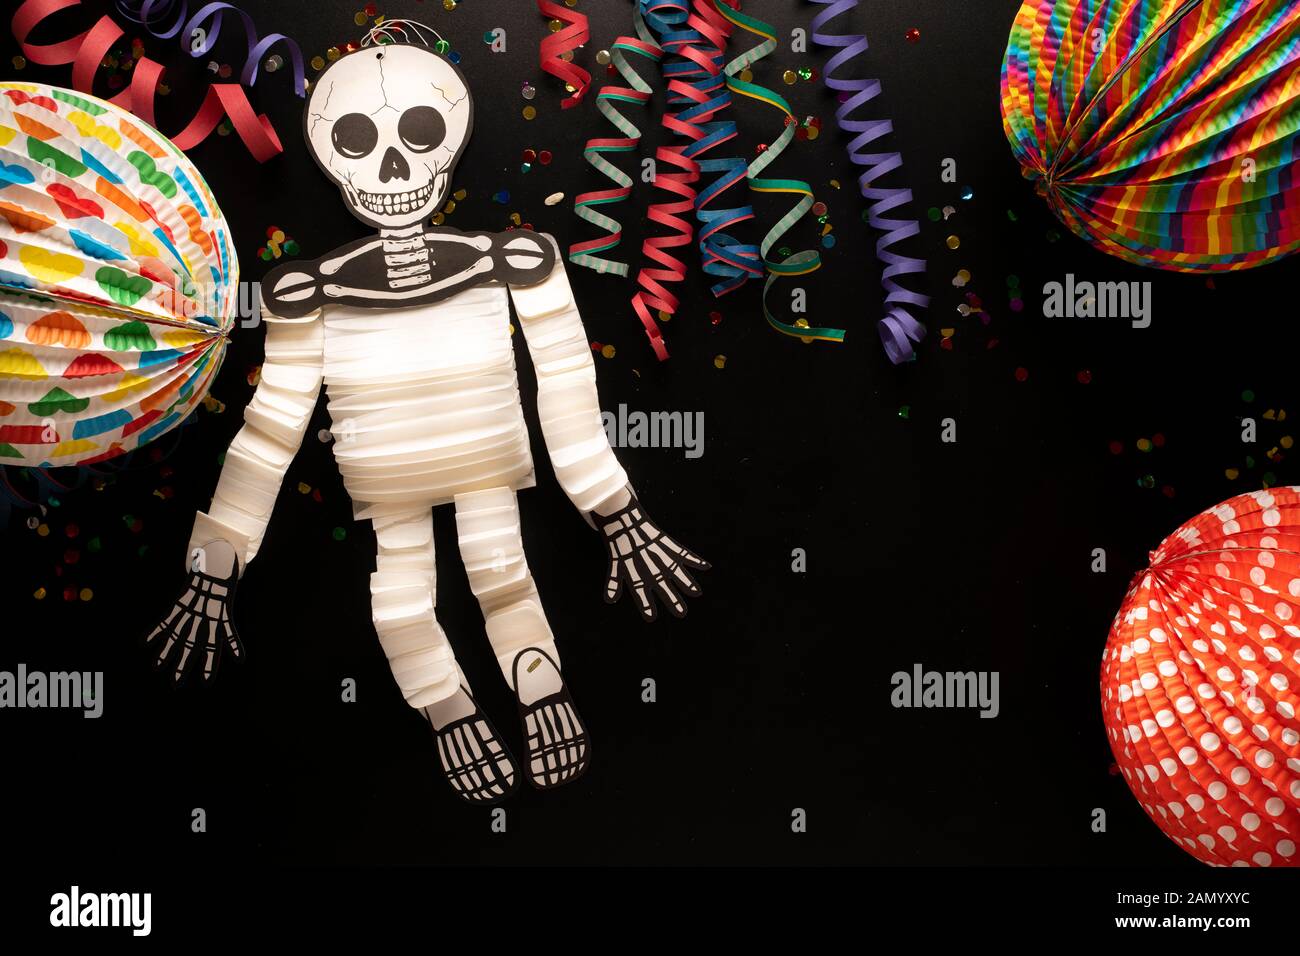 Carnival objects on a black background. Coiled streamers, paper skeleton, confetti, paper balloons and many other carnival objects Stock Photo